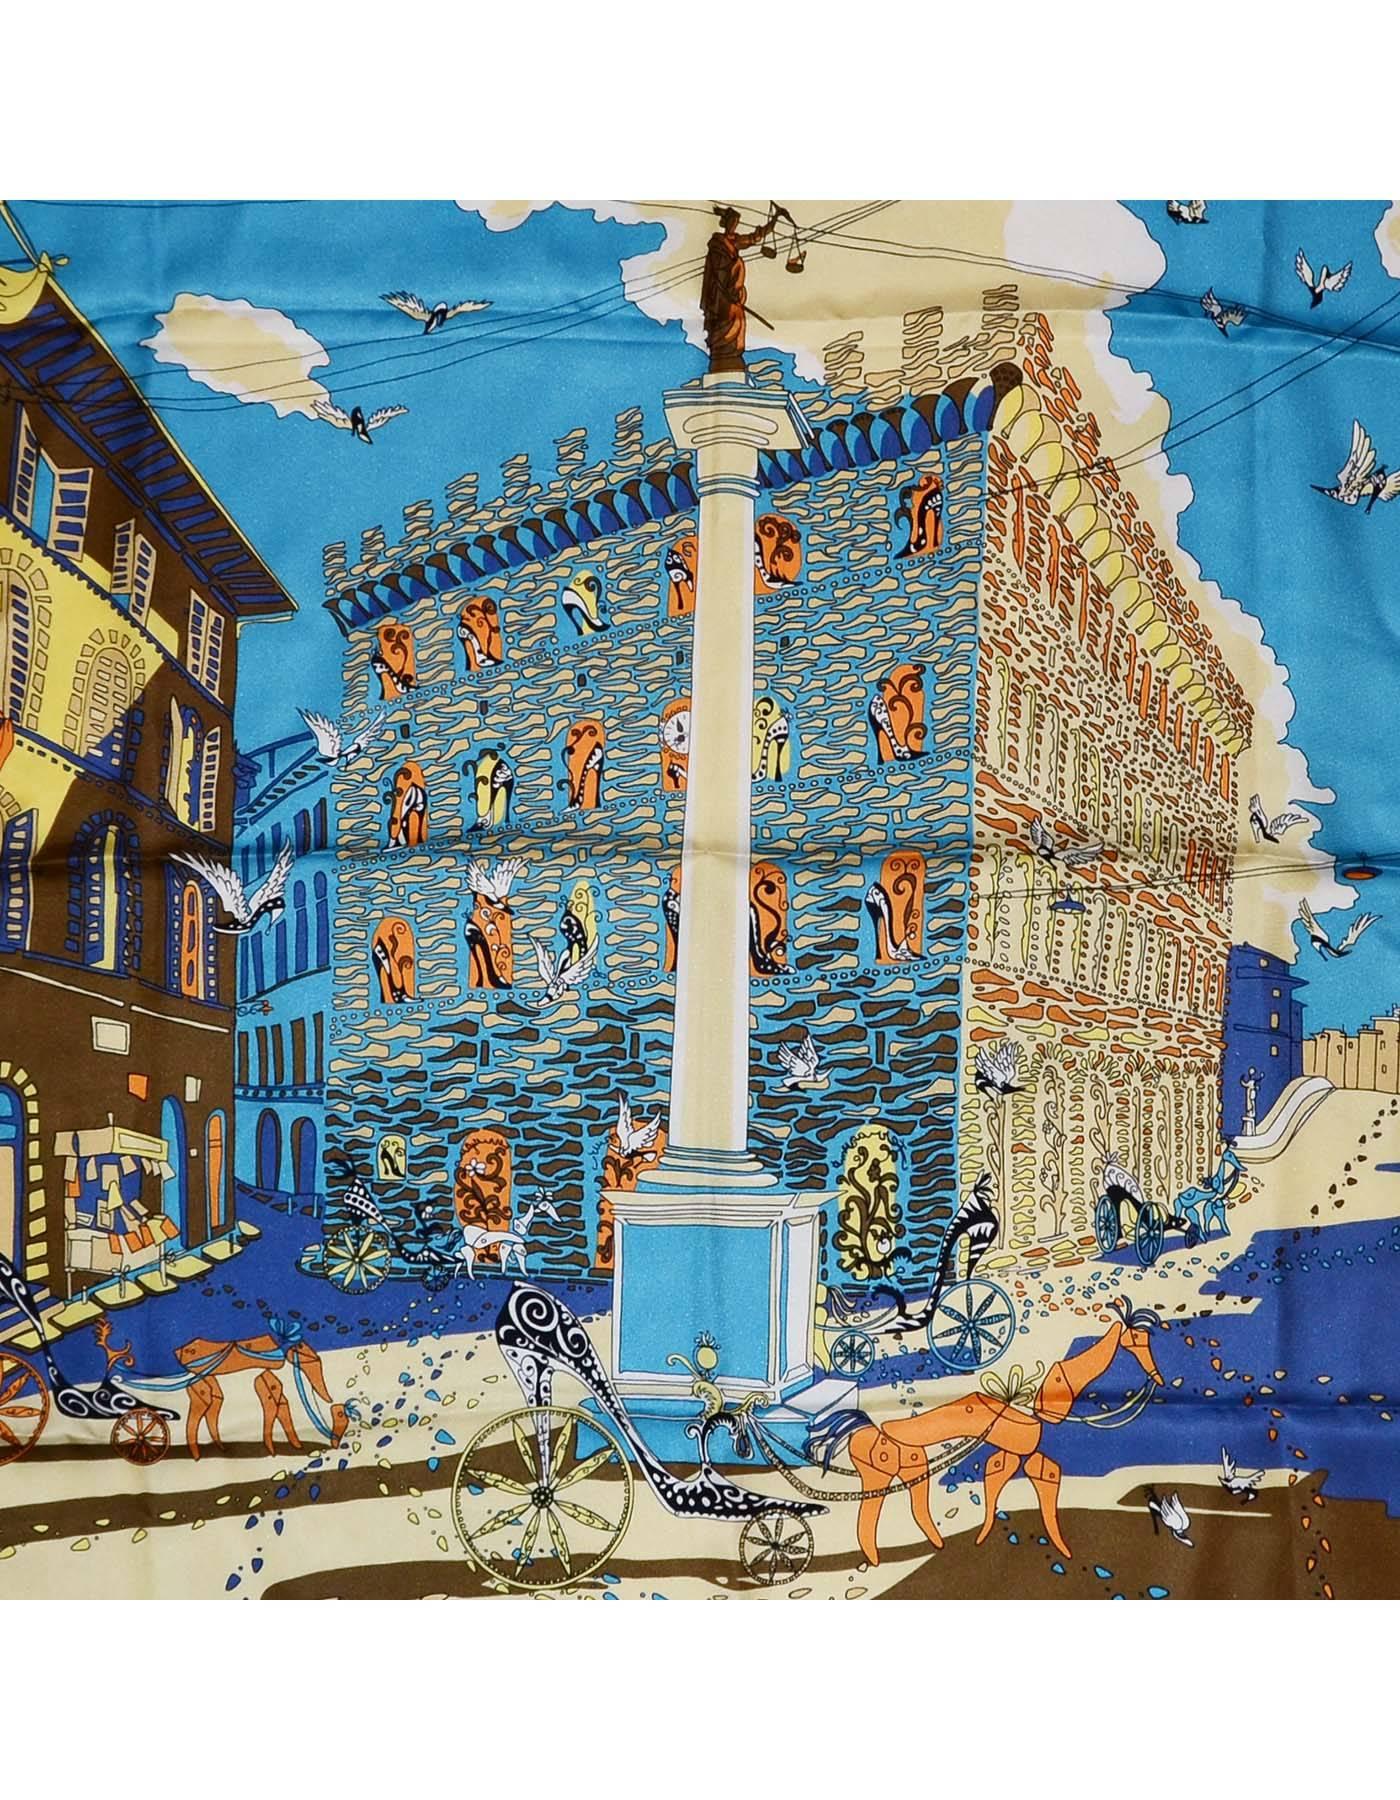 Salvatore Ferragamo Multi-Colored Printed Silk Scarf 
Features birds, building and a chariot printed throughout

Made In: Italy
Color: Multi-colored
Composition: 100% silk
Retail Price: $380 + tax
Overall Condition: Excellent- tags still